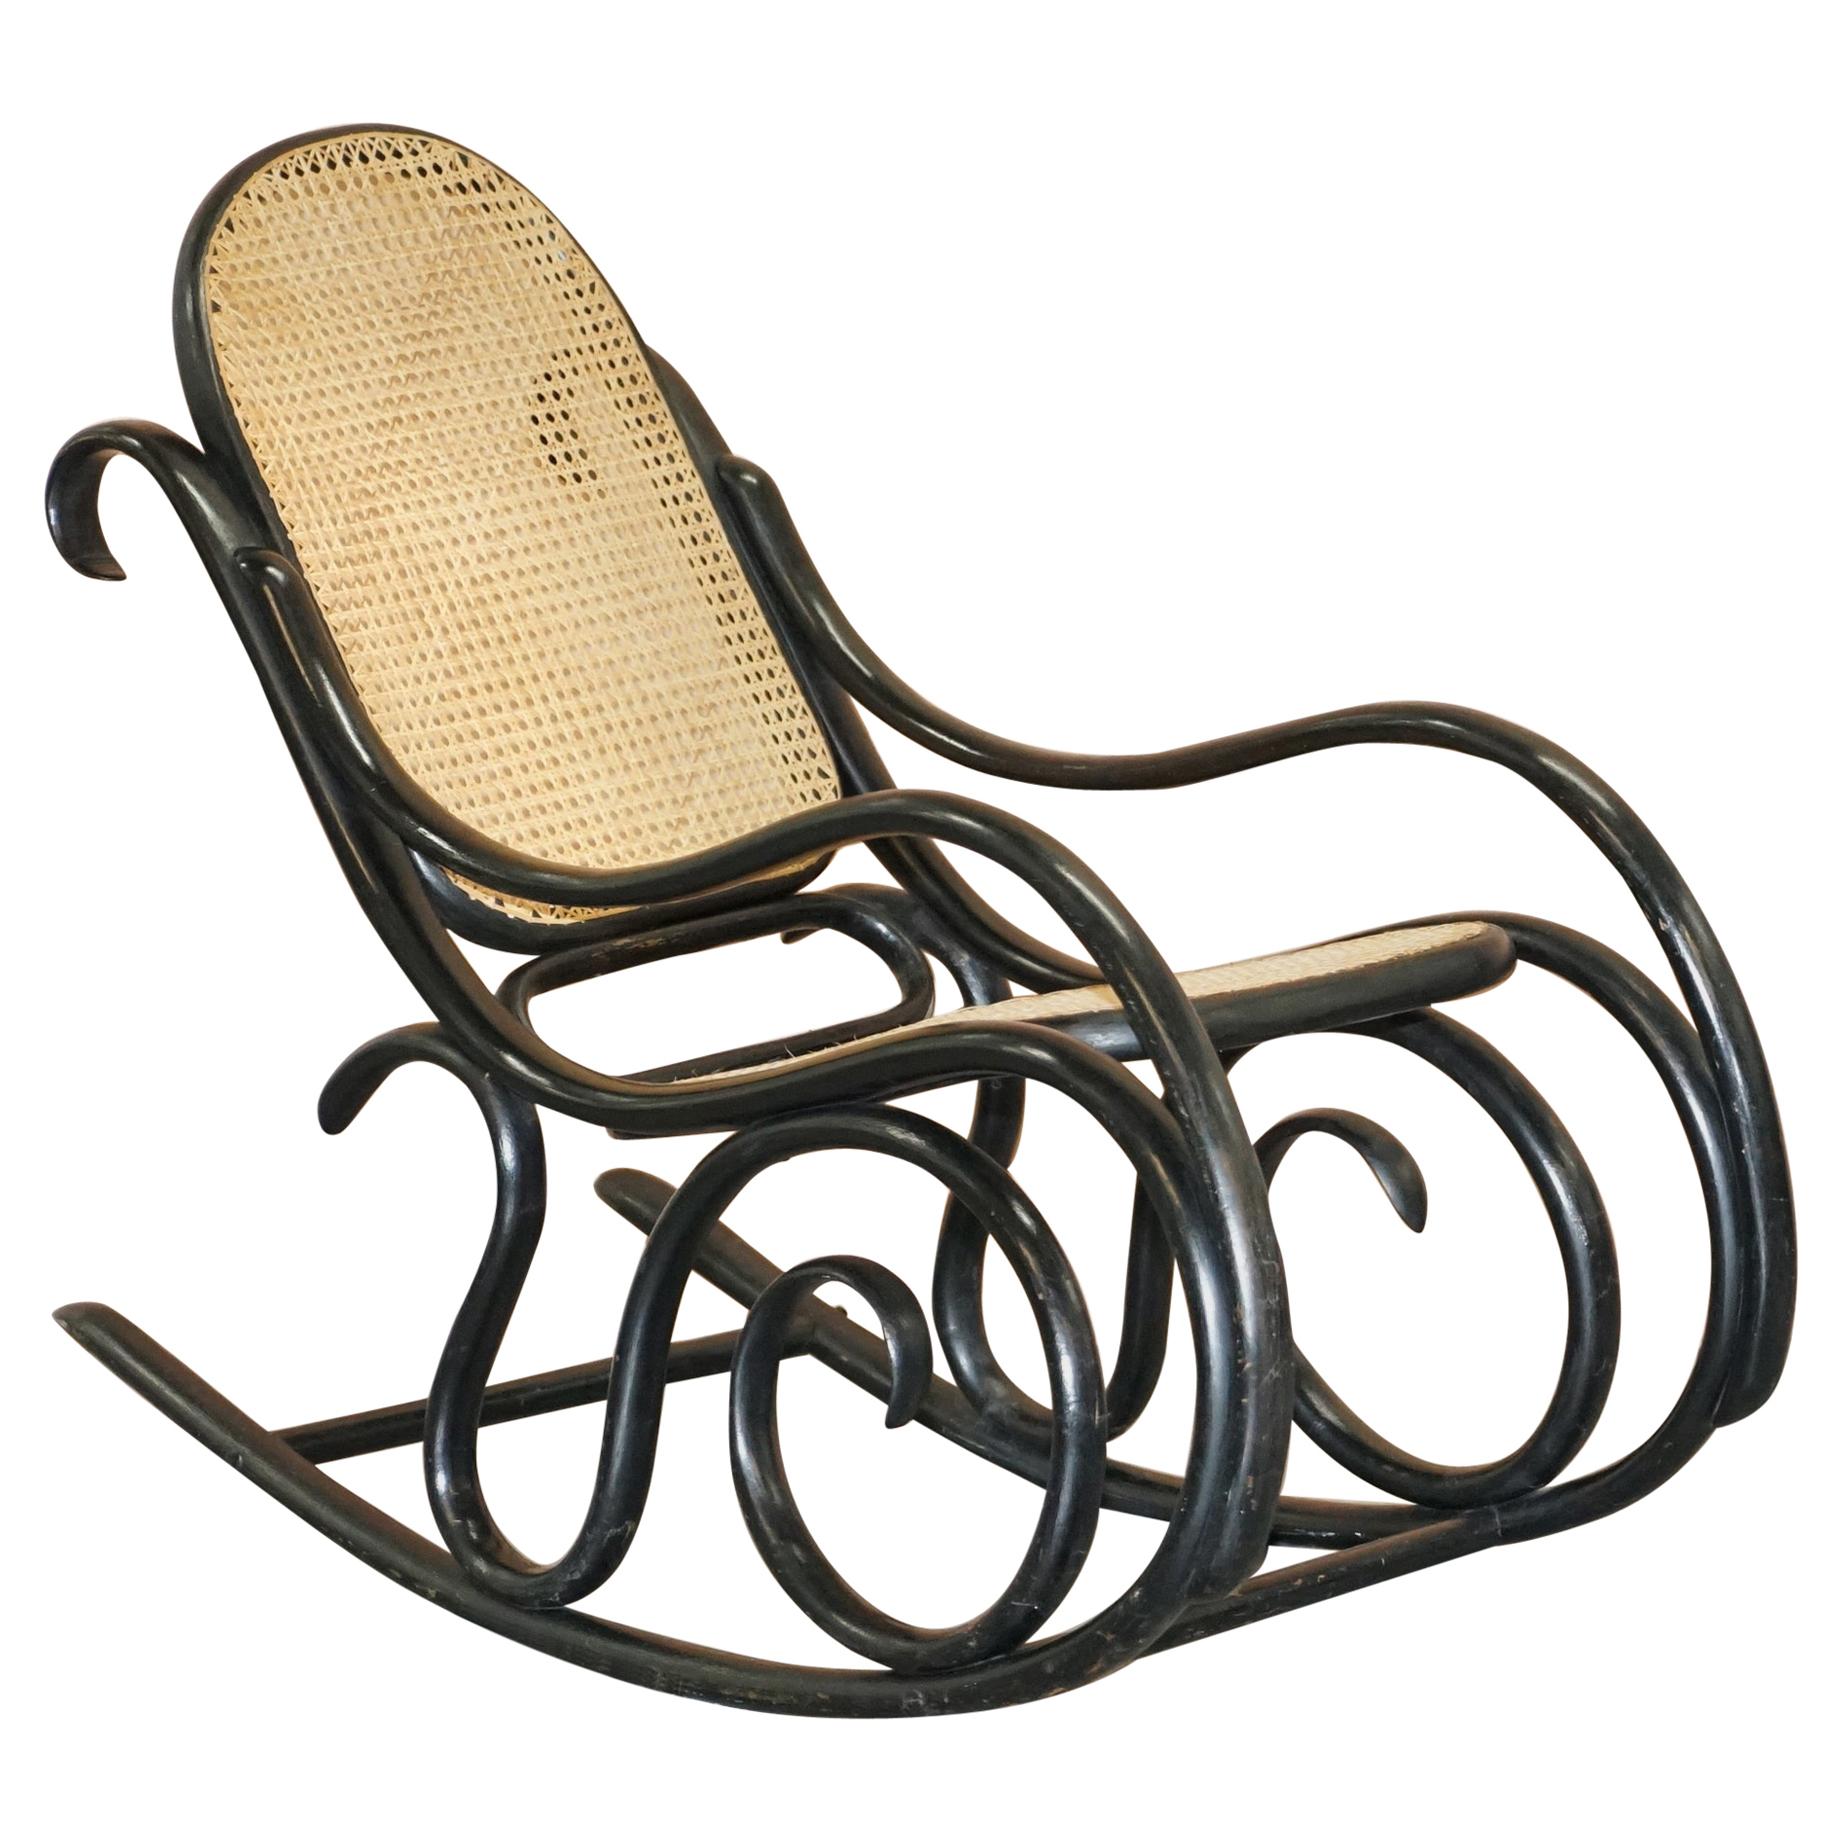 Vintage Thonet Ebonized Black Rattan Bergere Rocking Chair Lovely Small Armchair For Sale